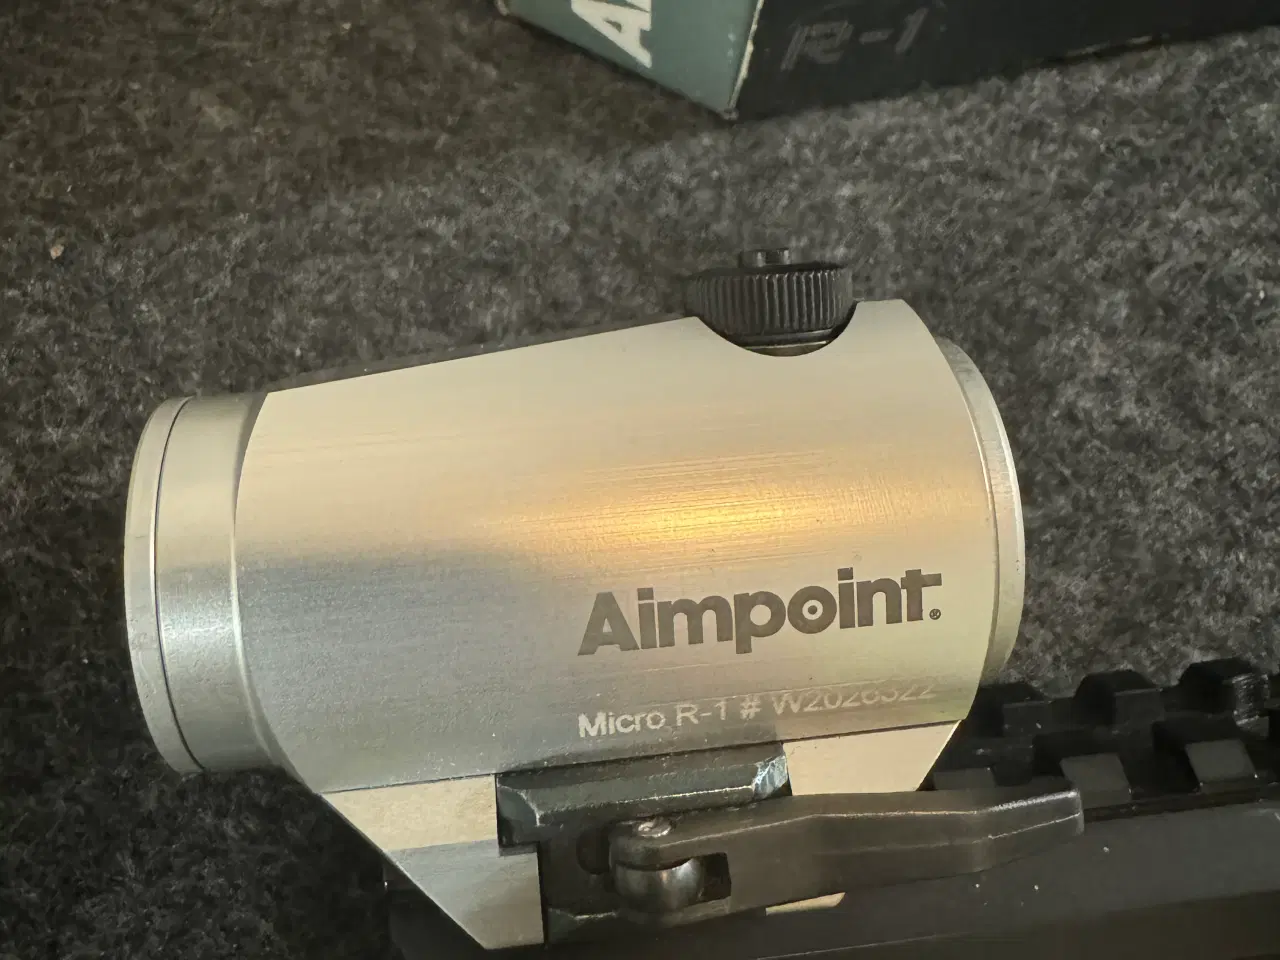 Billede 1 - Aimpoint Micro silver